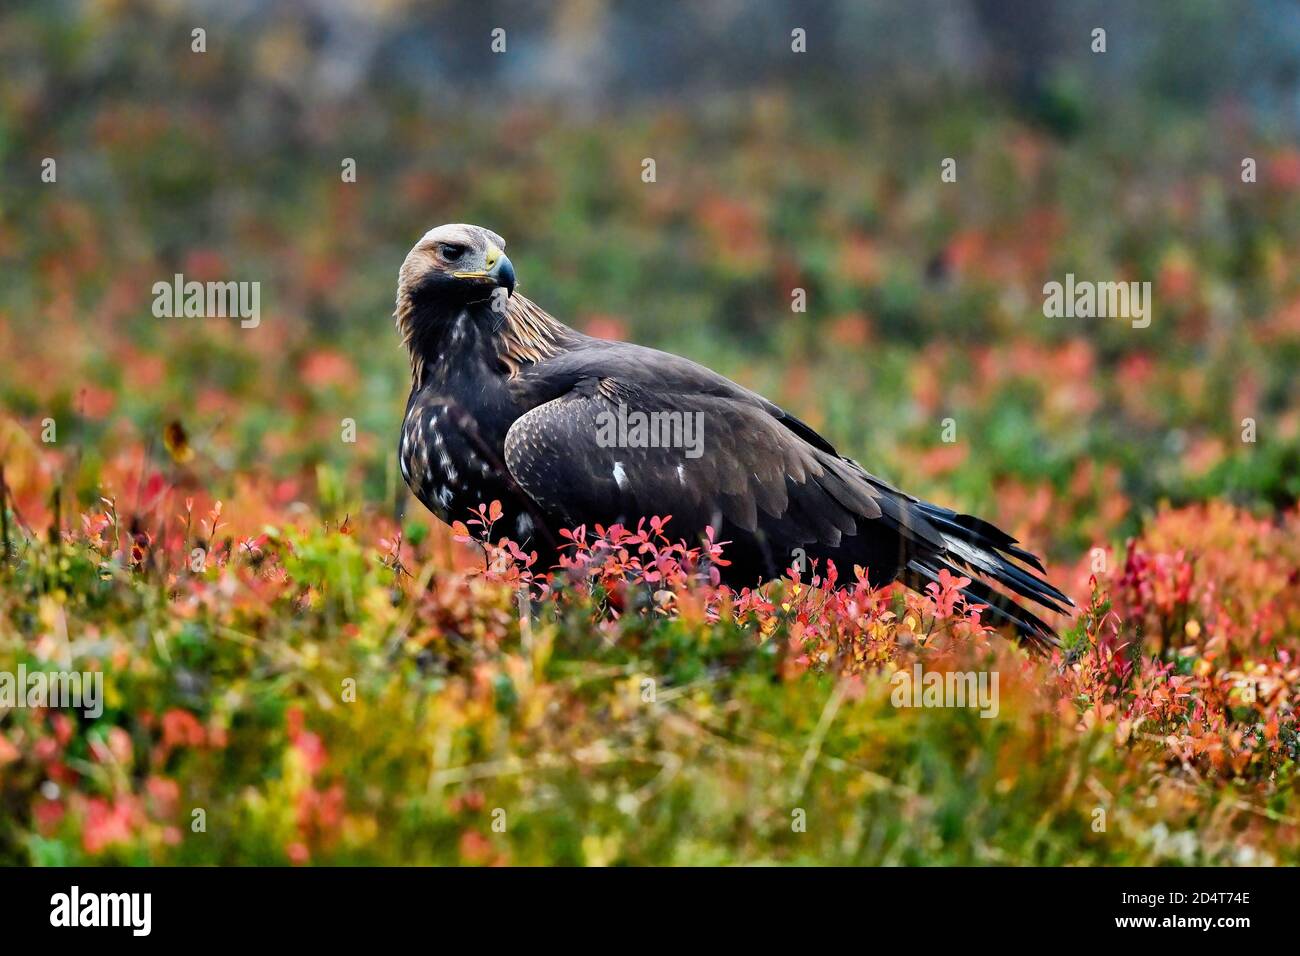 Golden eagle in the boreal forest with autumn colors Stock Photo